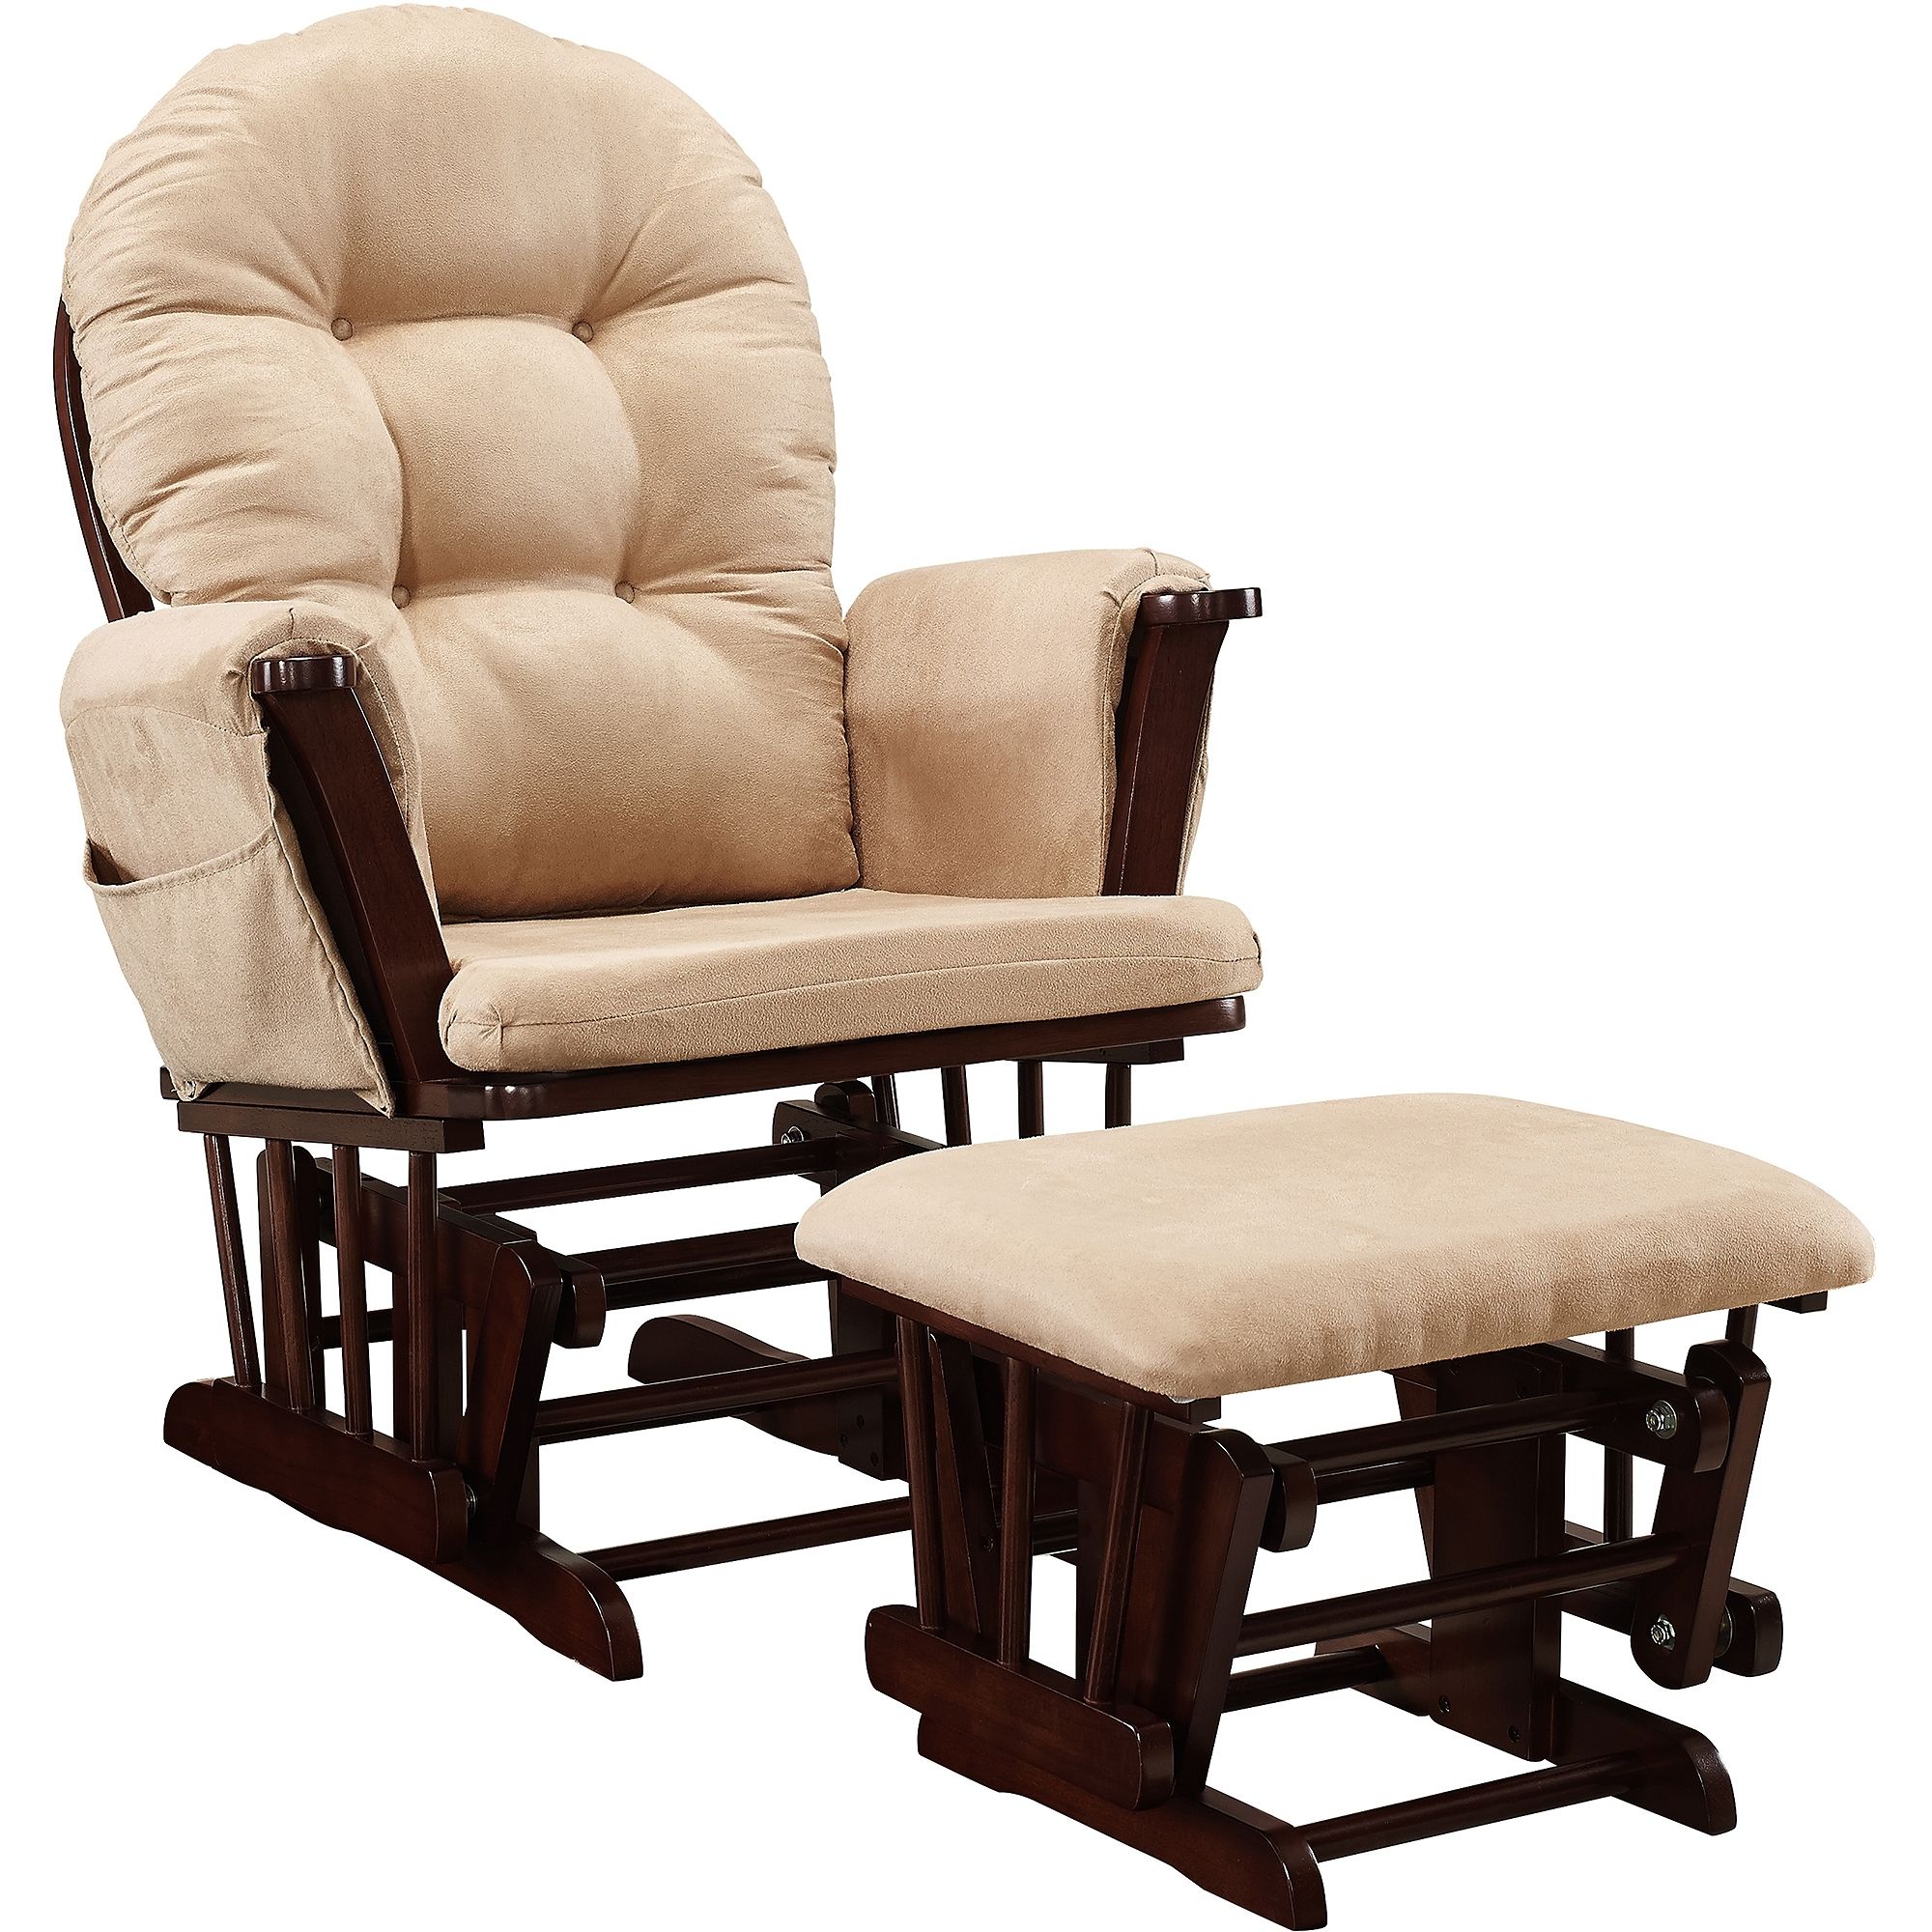 Baby Relax Evan Swivel Glider And Ottoman Gray – Walmart Inside Patio Rocking Chairs With Ottoman (View 5 of 15)